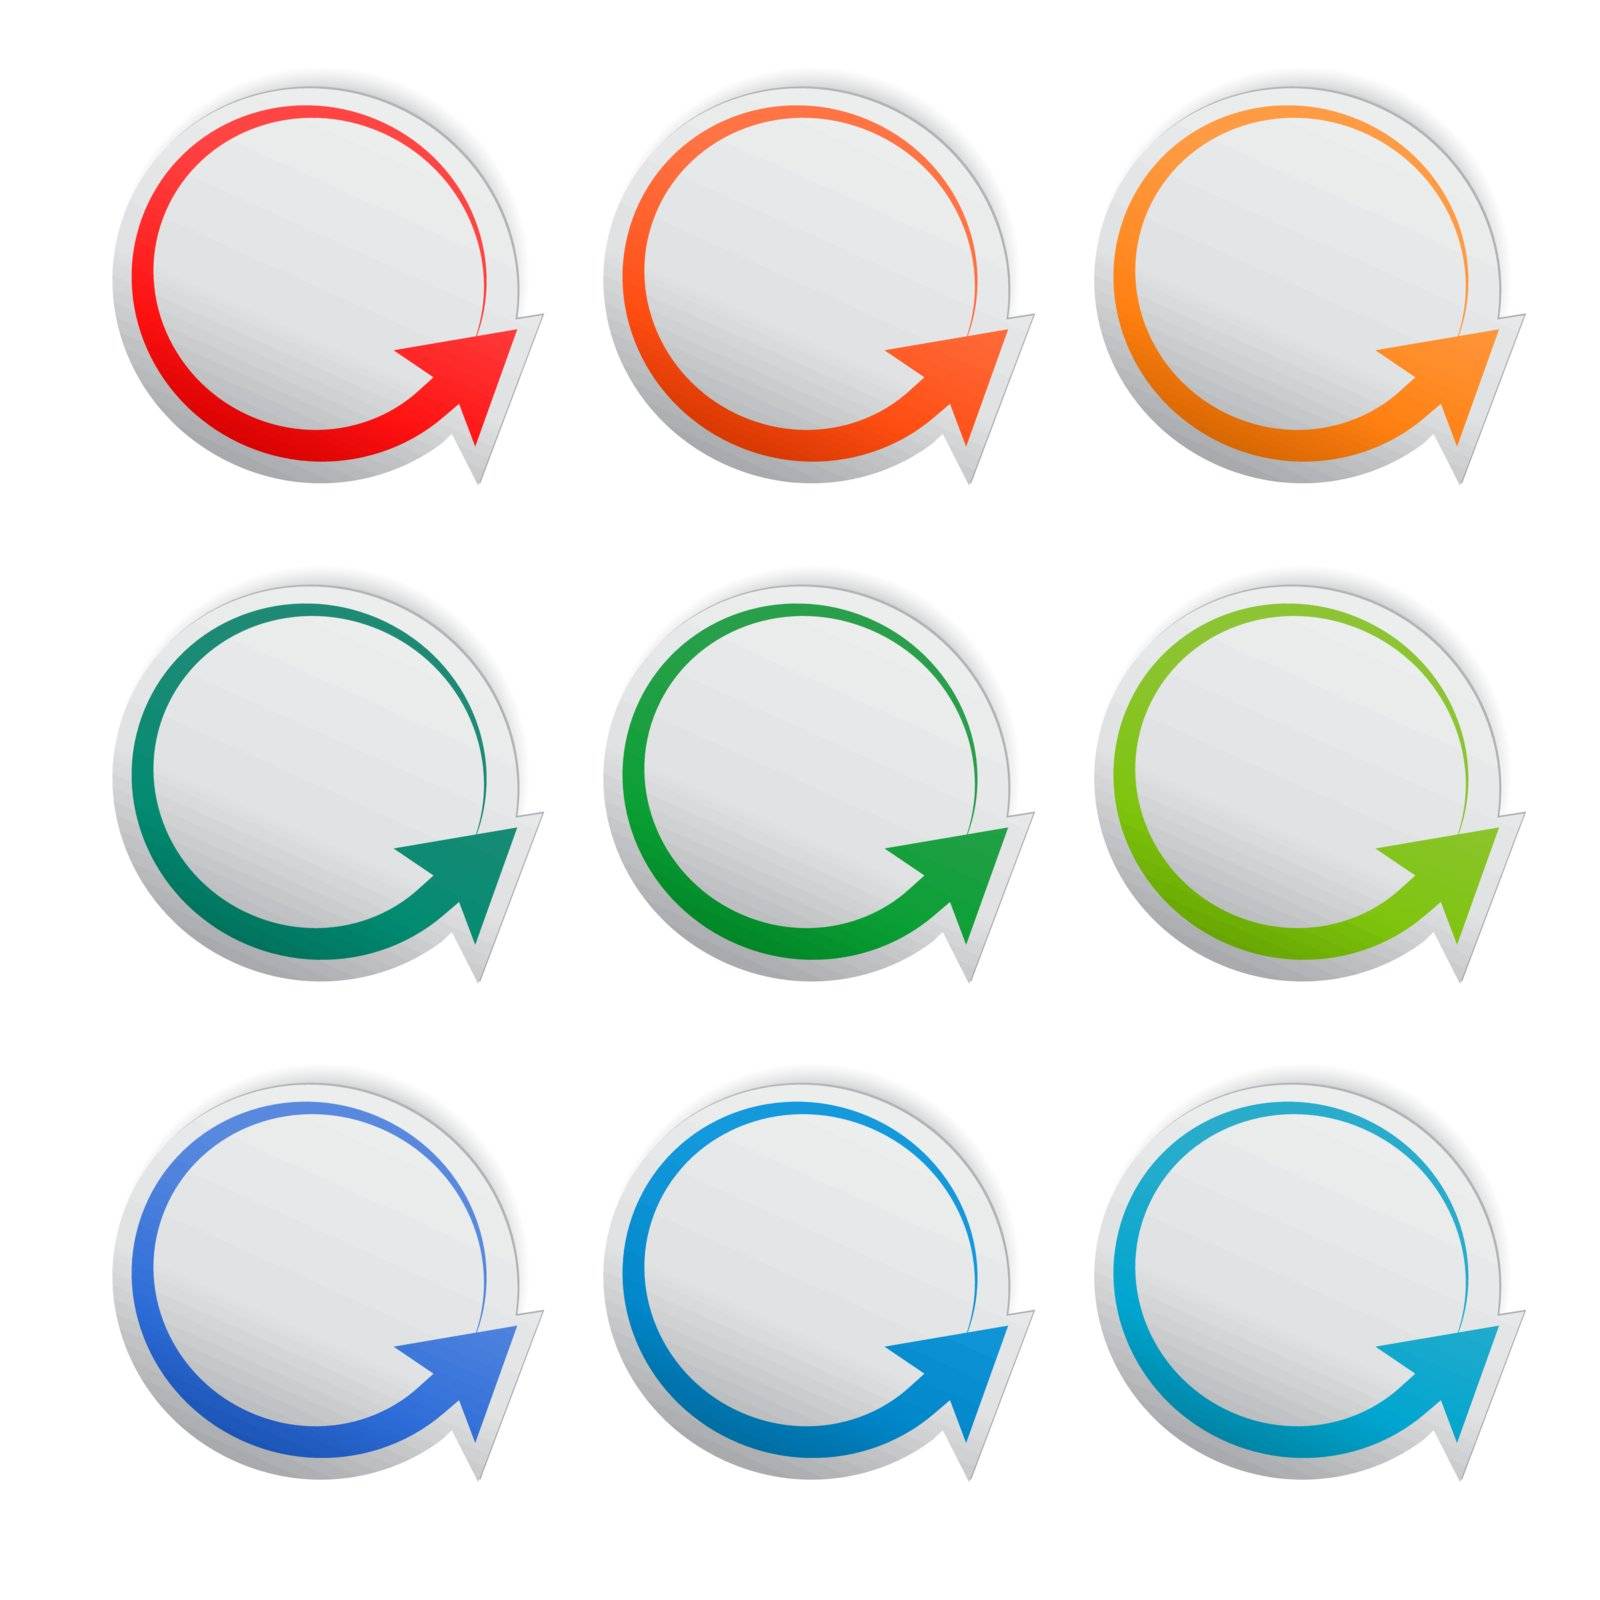 Round paper stickers with arrows, vector